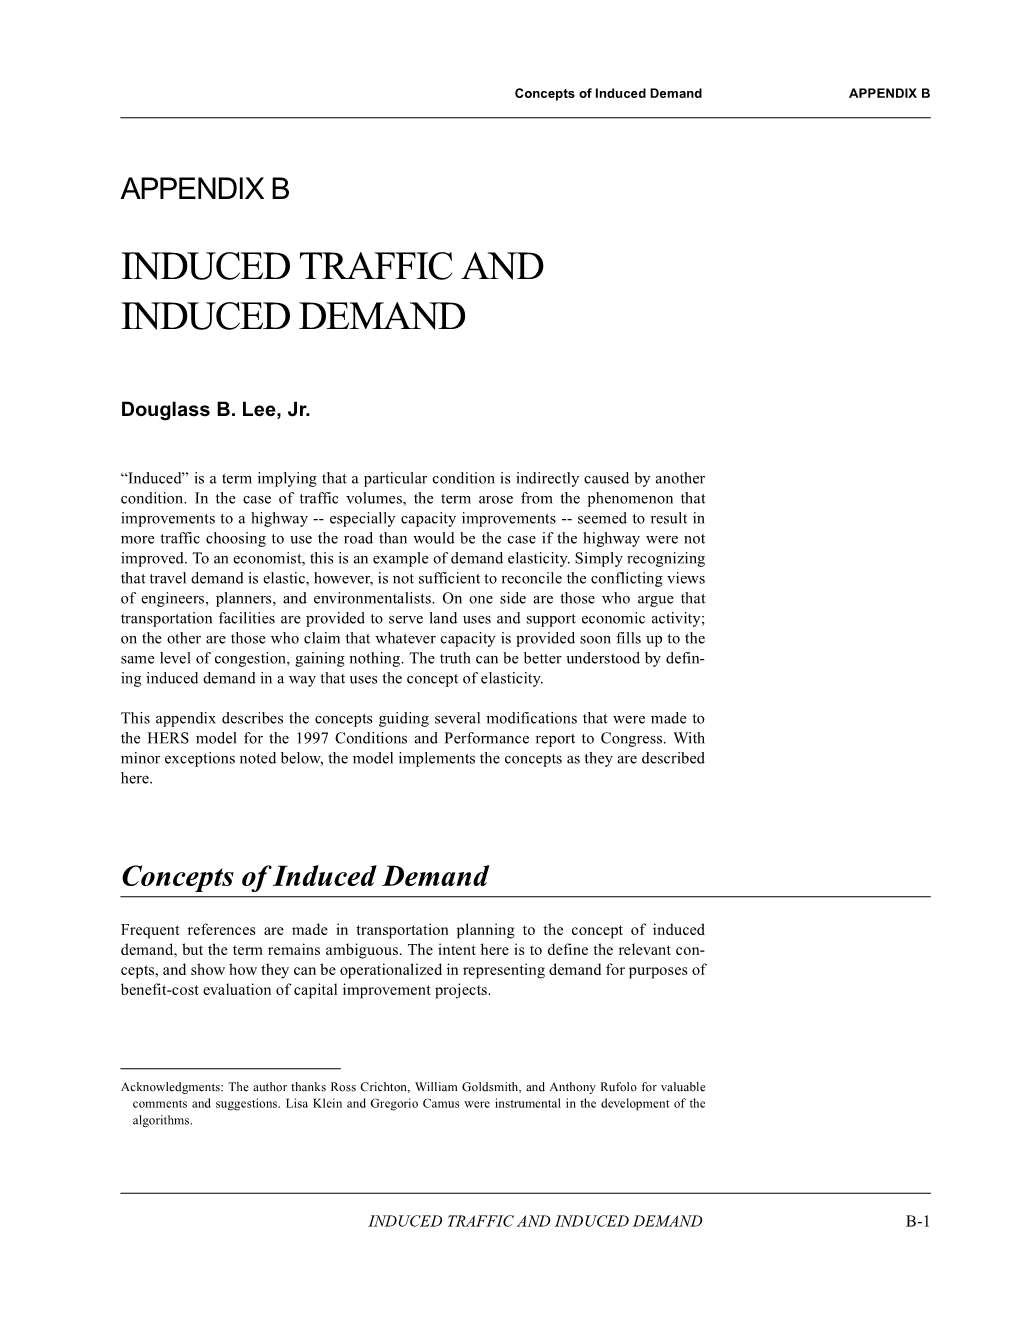 Induced Traffic and Induced Demand